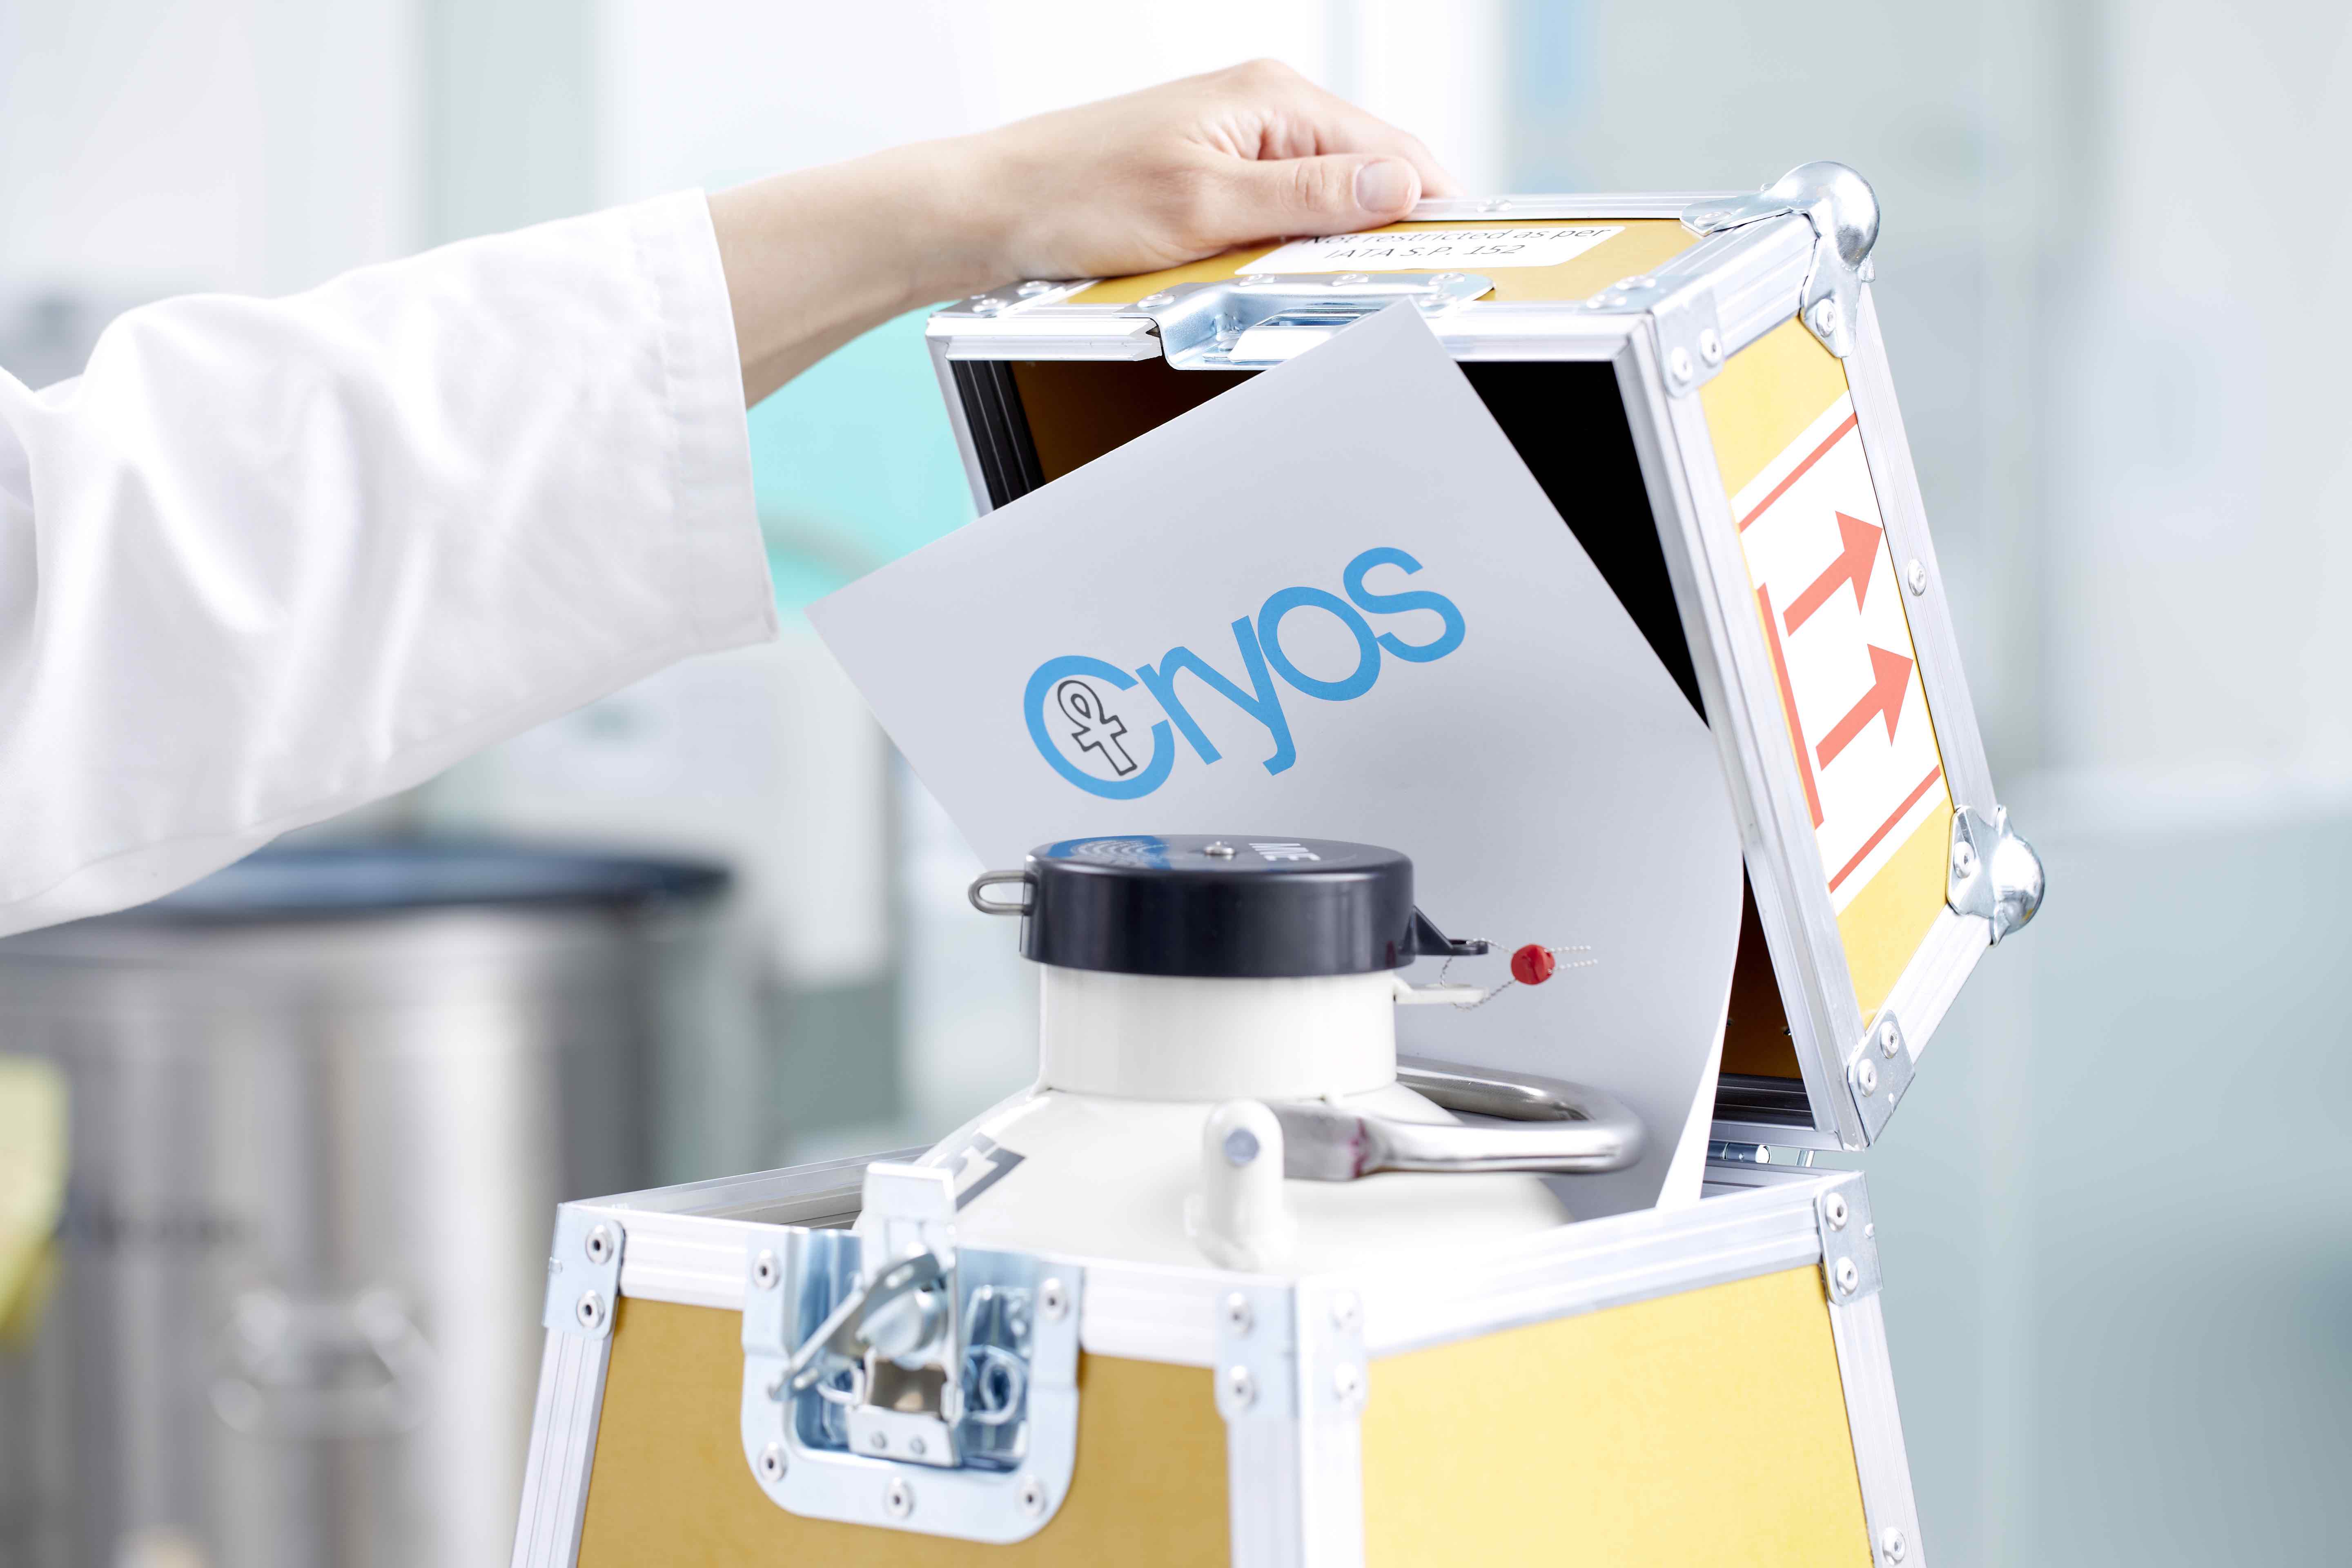 A nitrogen tank with a piece of paper with the Cryos logo inside being closed – Photo from the Cryos press kit. 